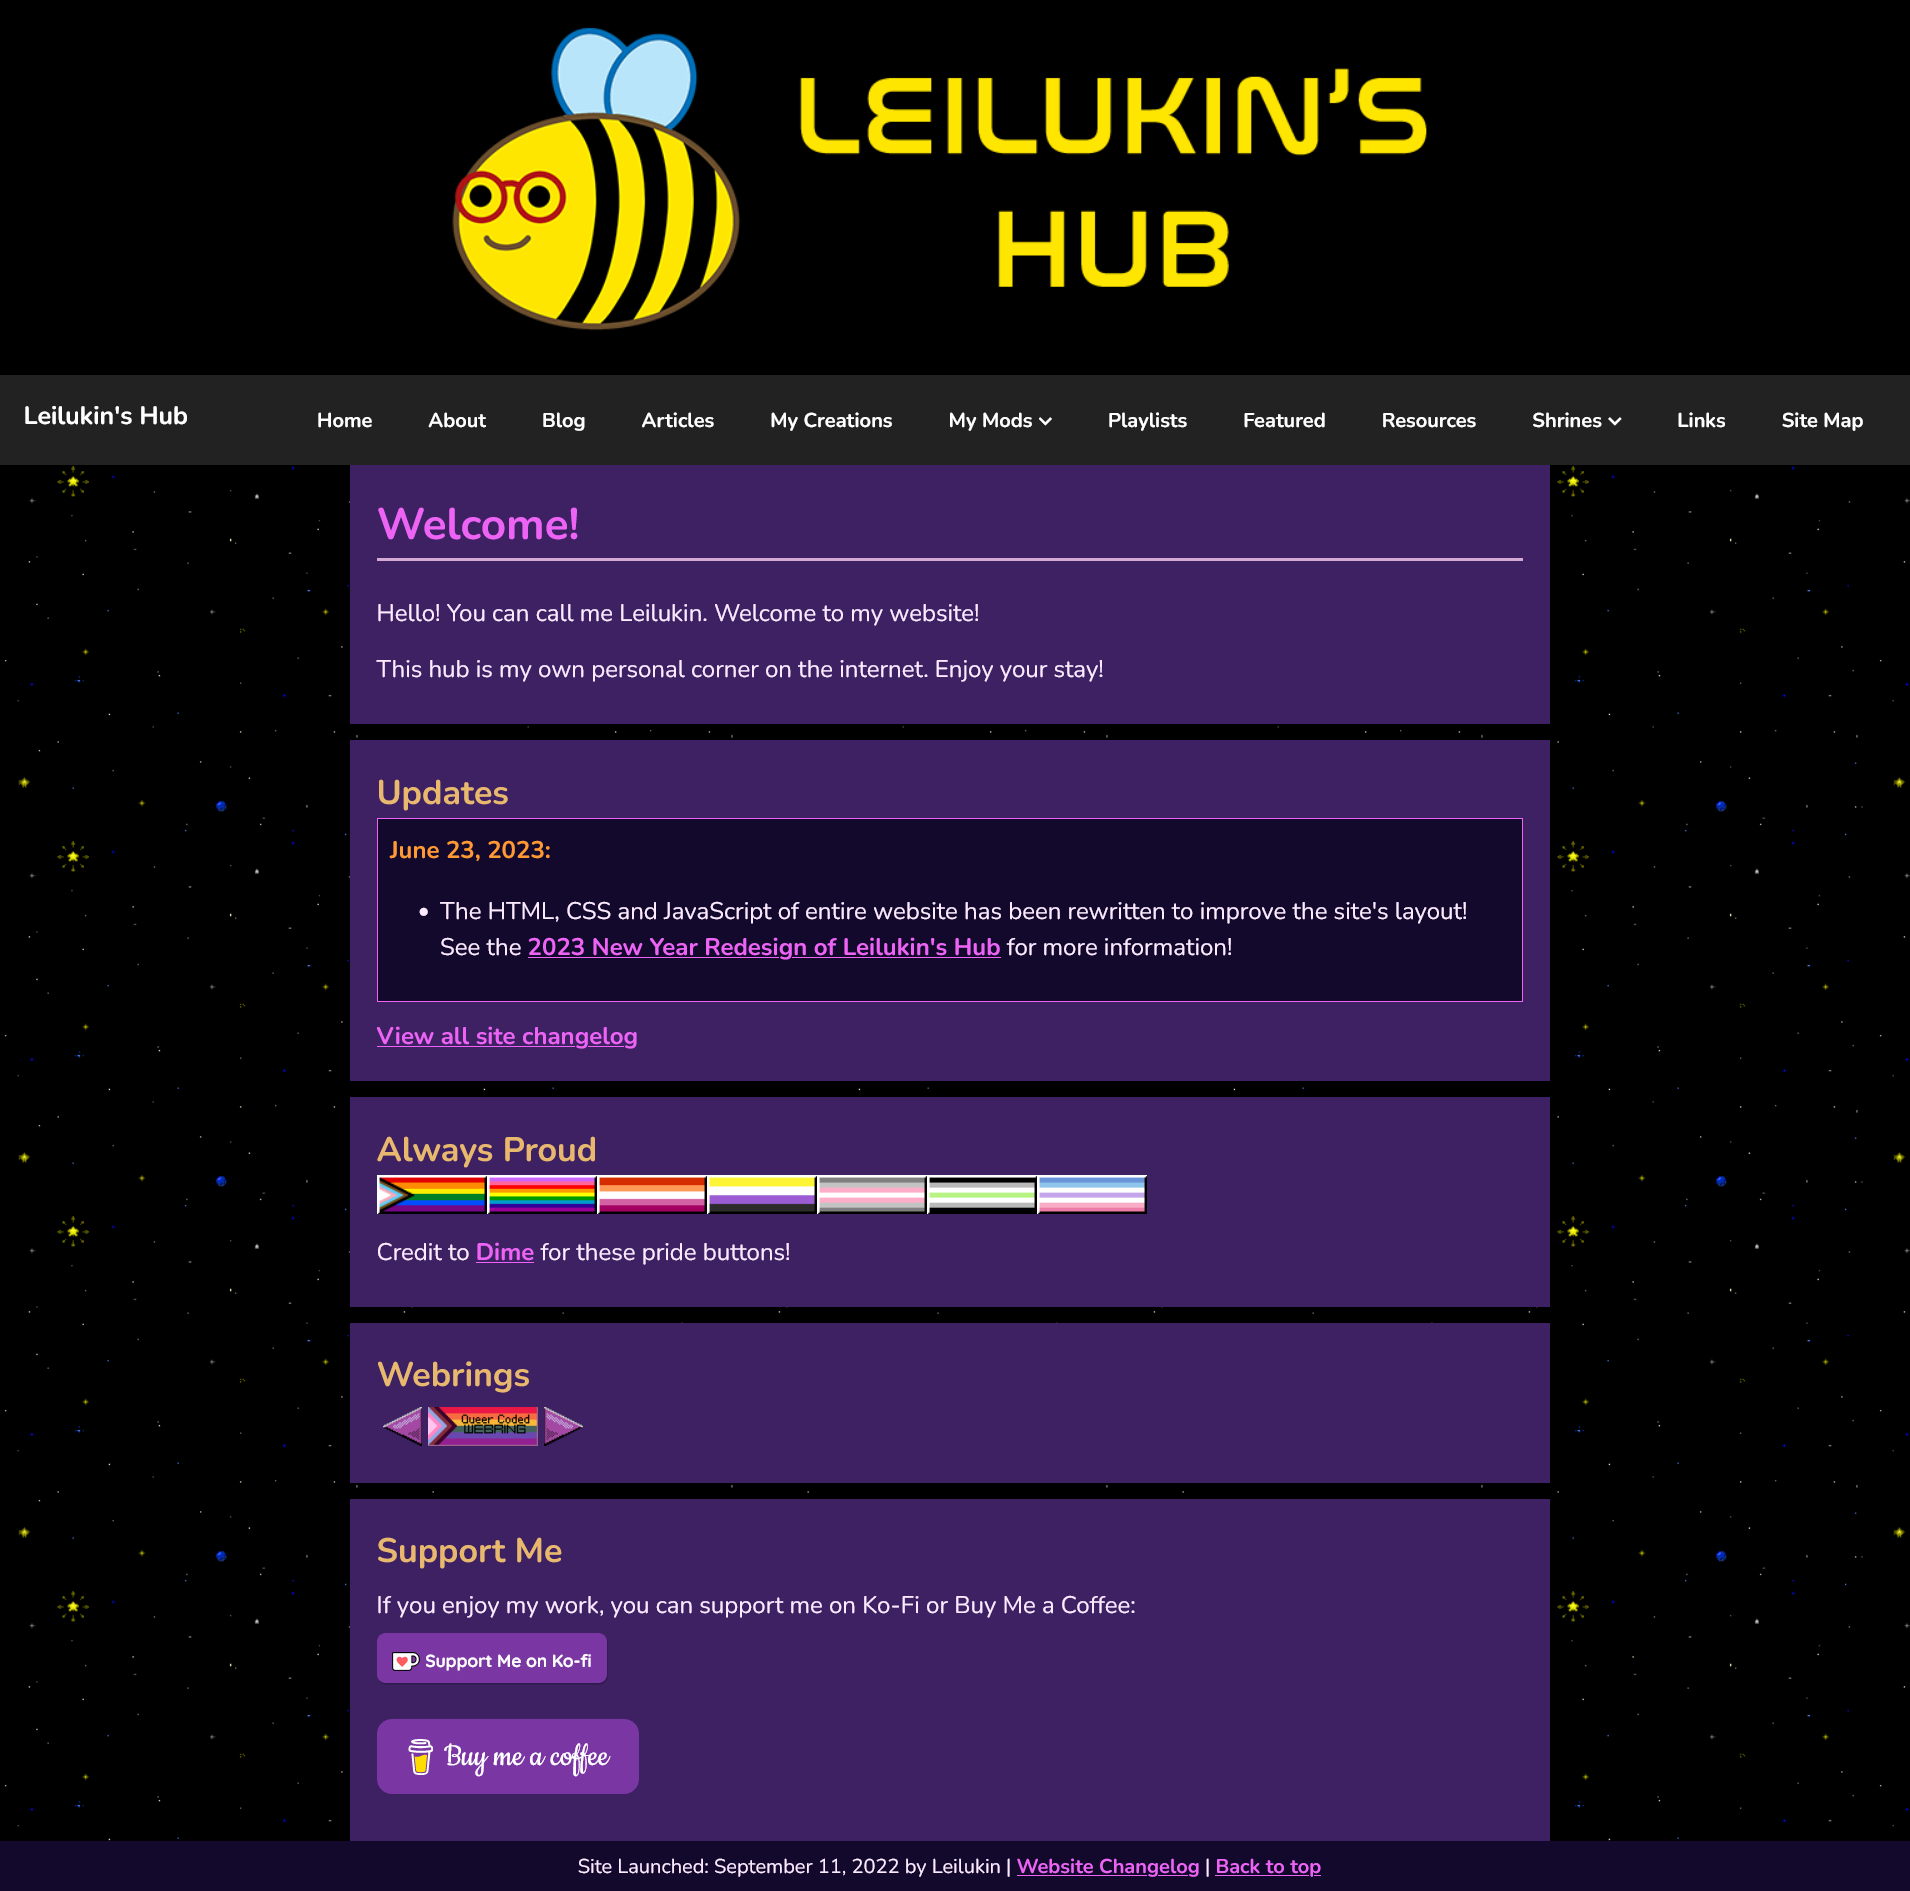 Leilukin's Hub home page on 23 June 2023